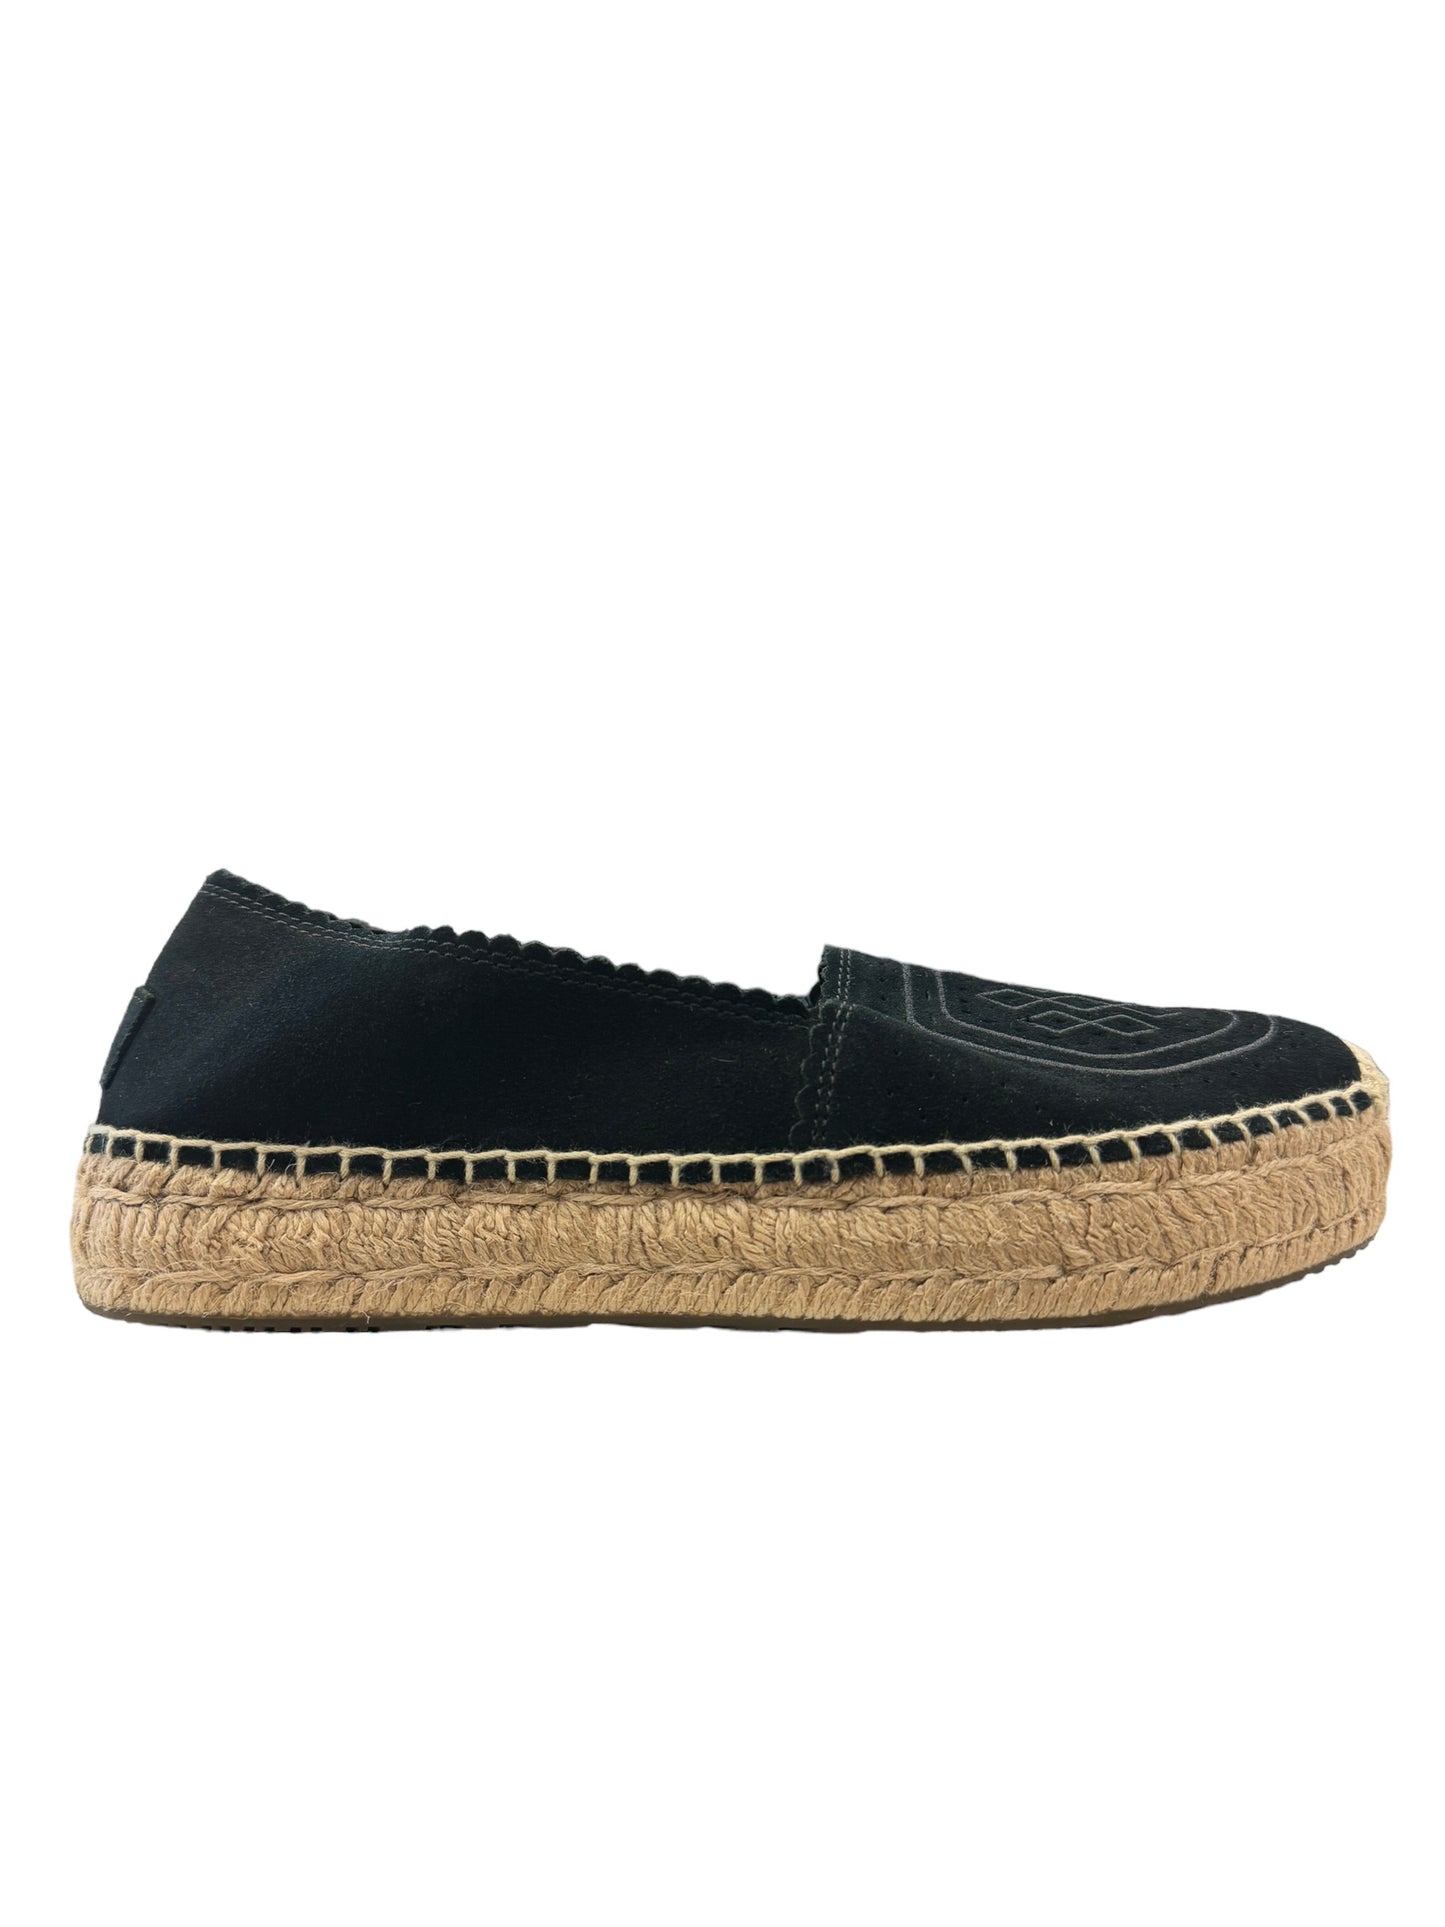 Shoes Flats By Ugg  Size: 8.5